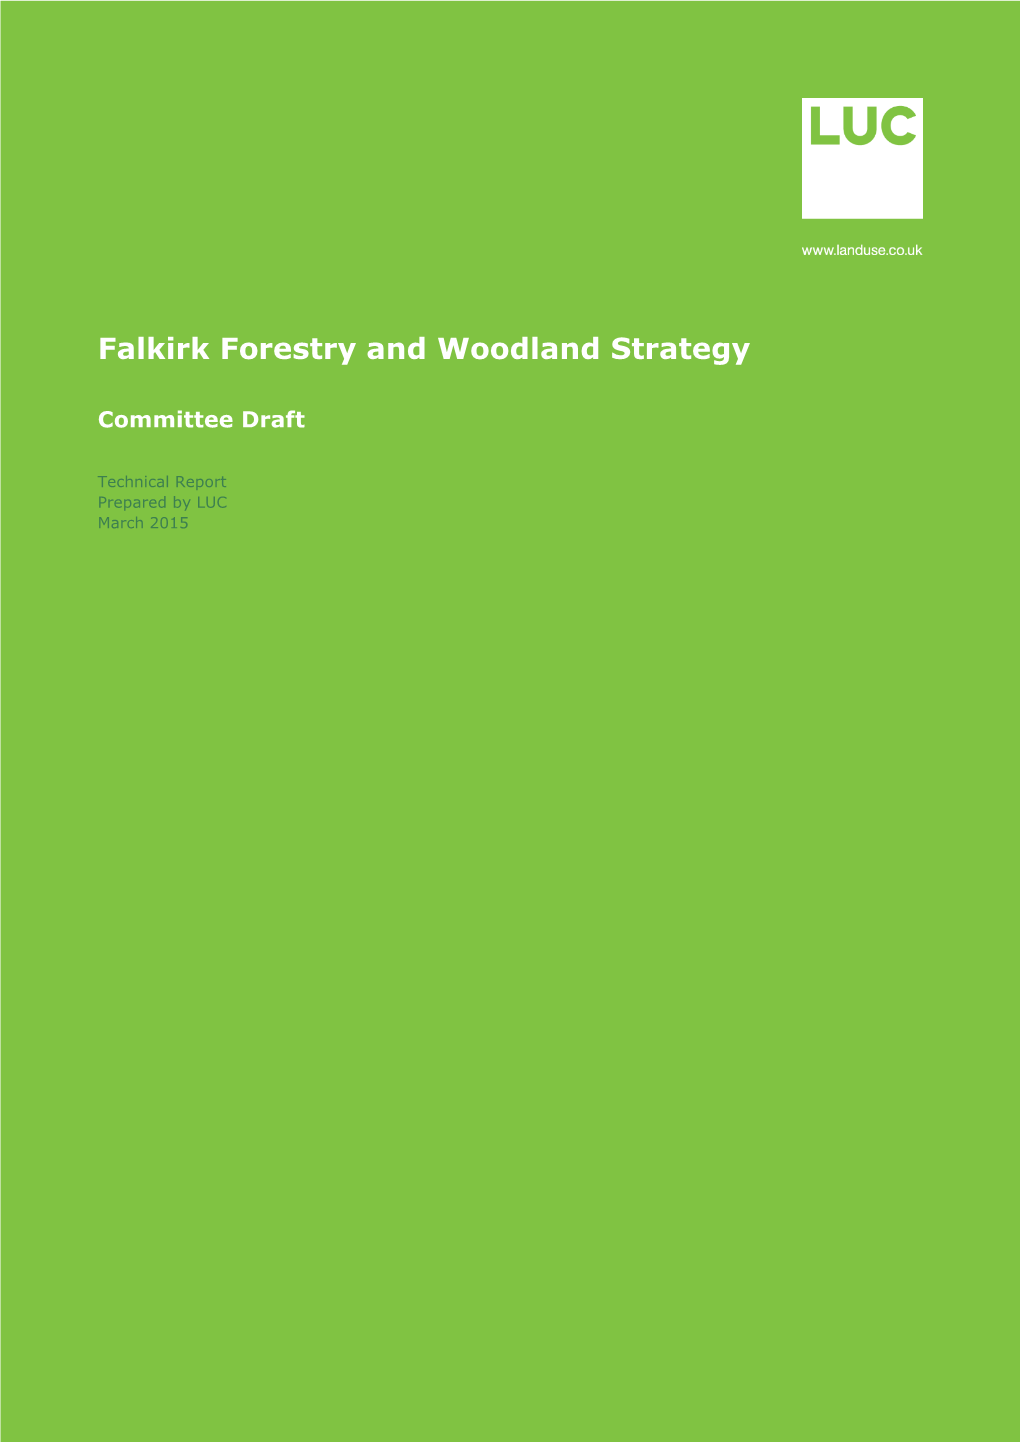 Falkirk Forestry and Woodland Strategy